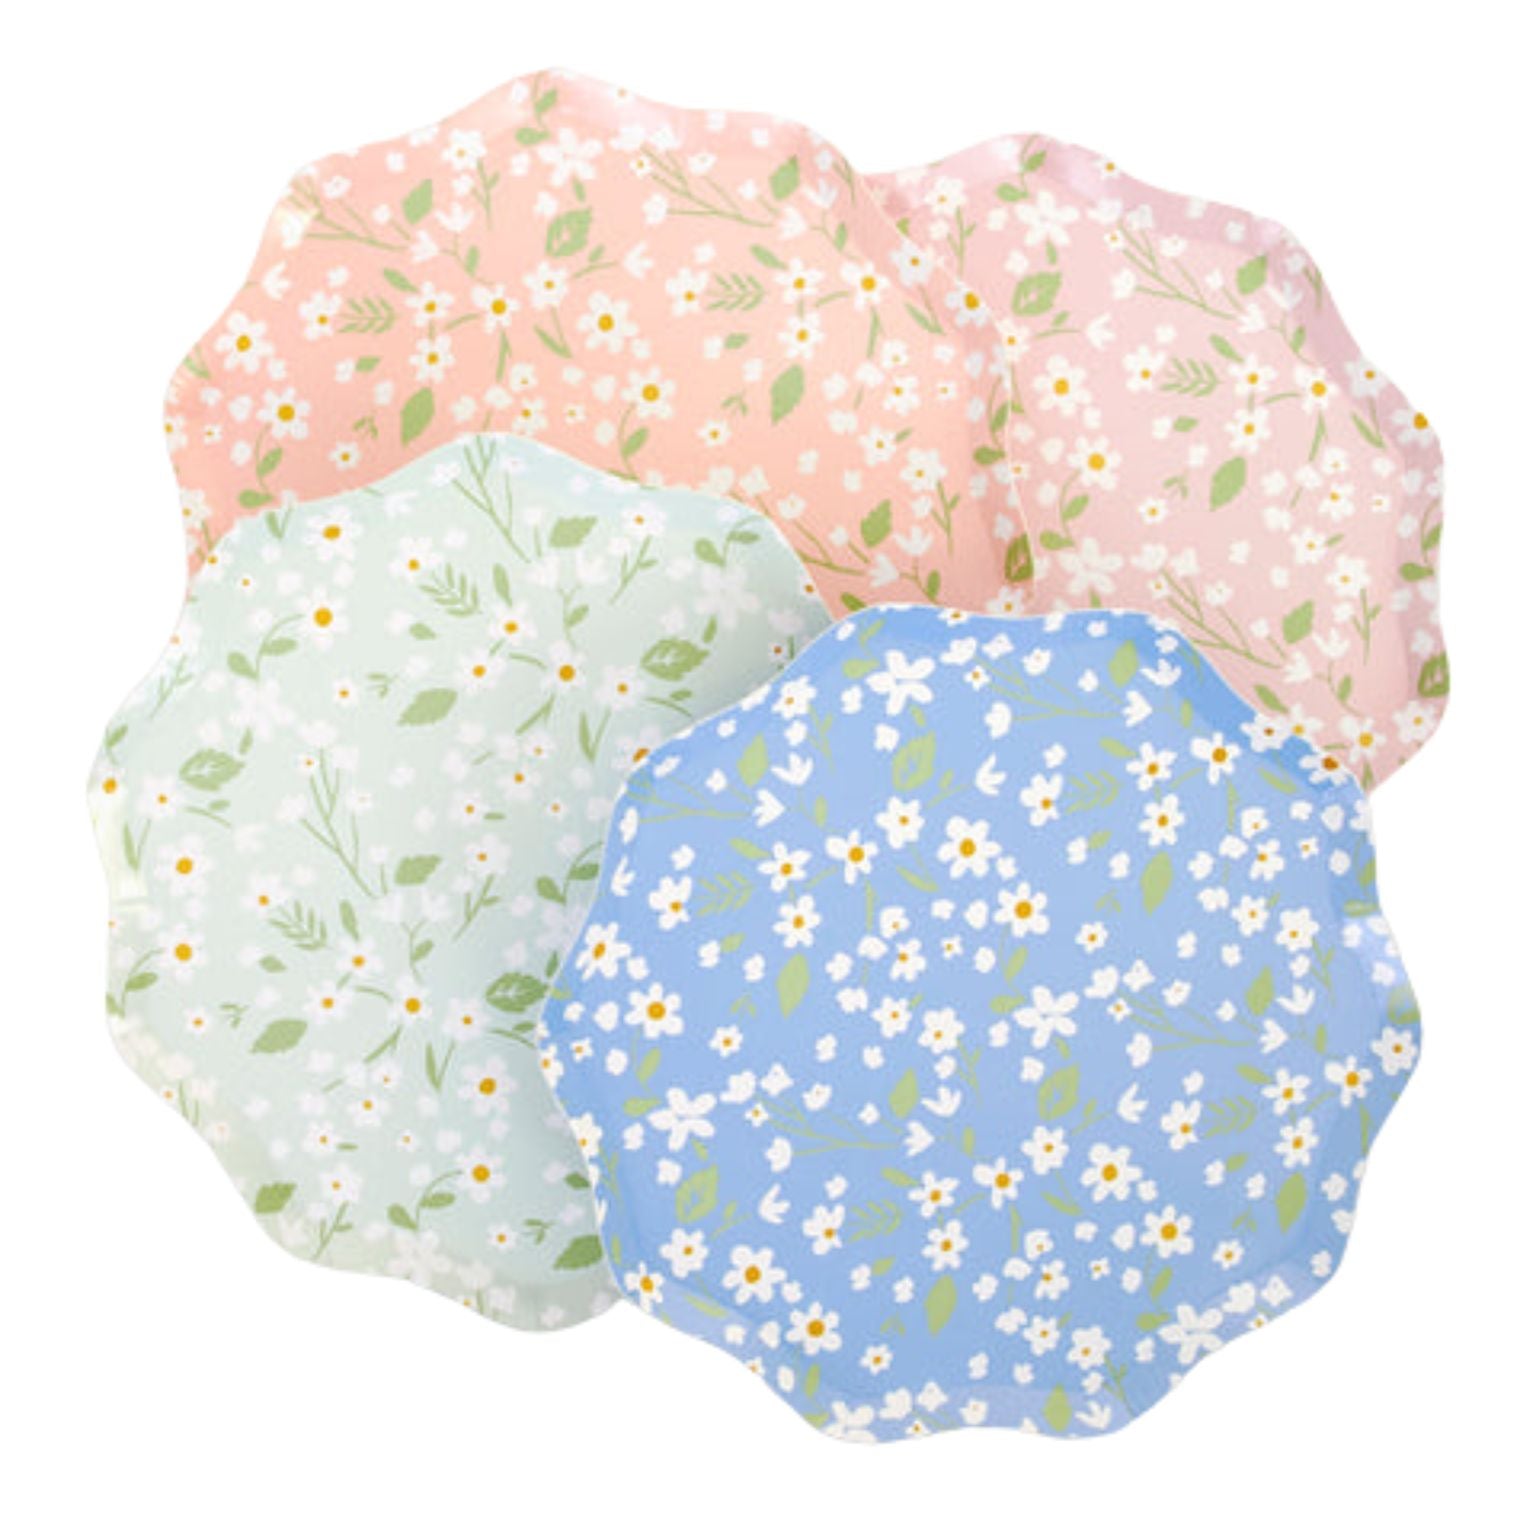 MeriMeri Ditsy Floral Small Plates (PK12) in assorted color